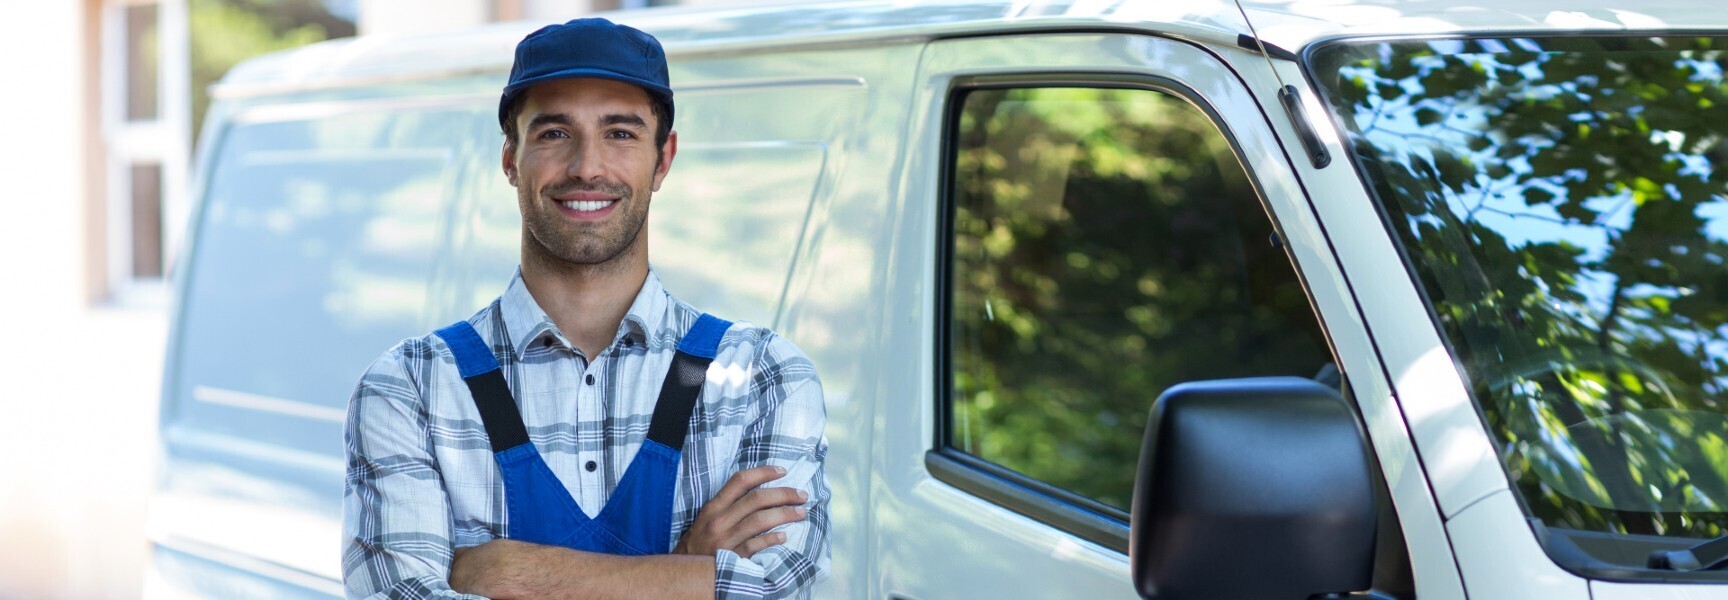 A handyman standing with his arms crossed in front of a white van.